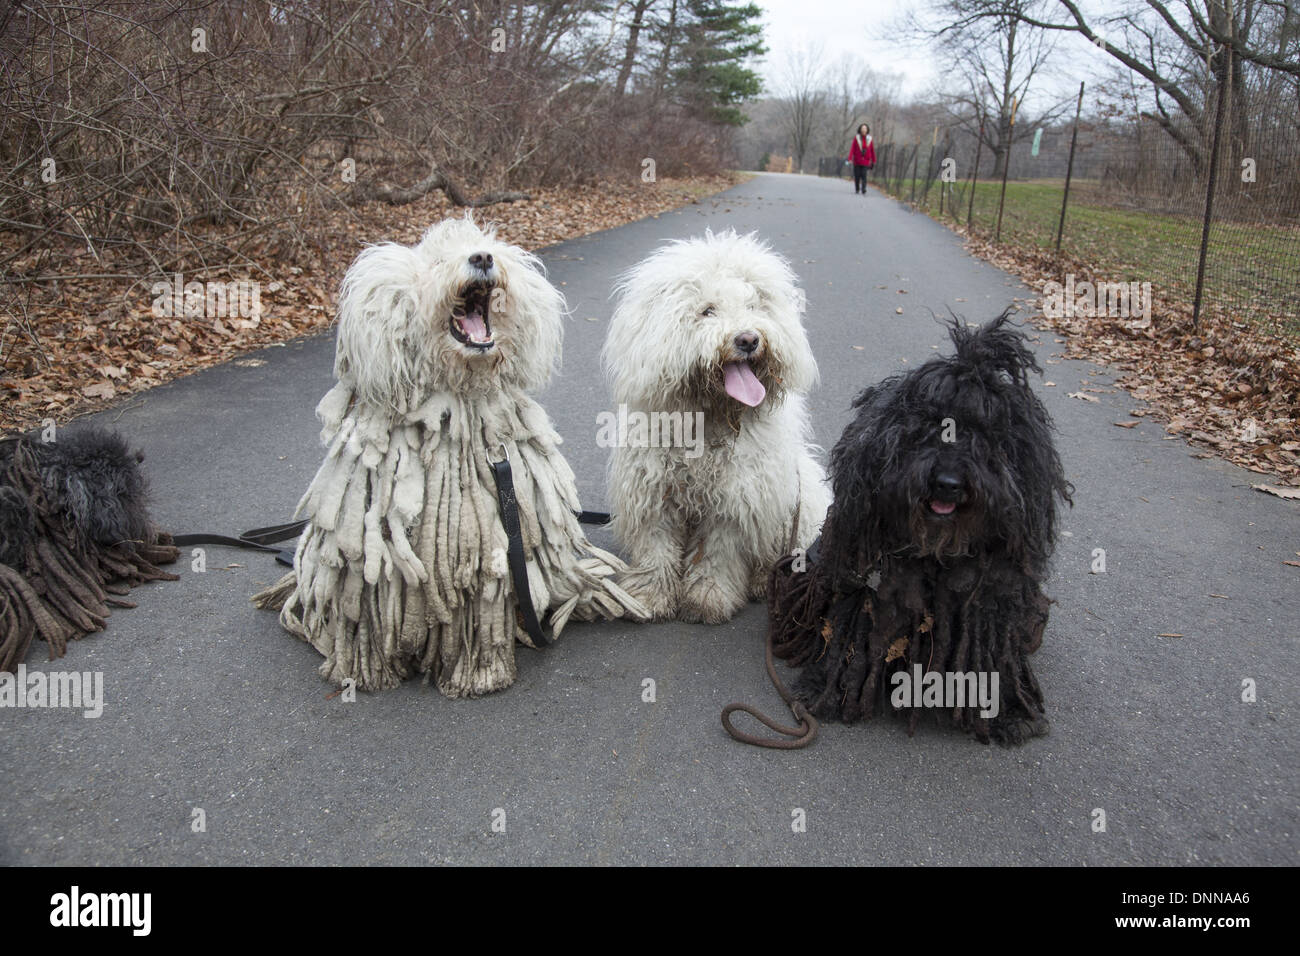 The Puli is a small-medium breed of Hungarian herding and livestock guarding dog known for its long, corded coat. Stock Photo